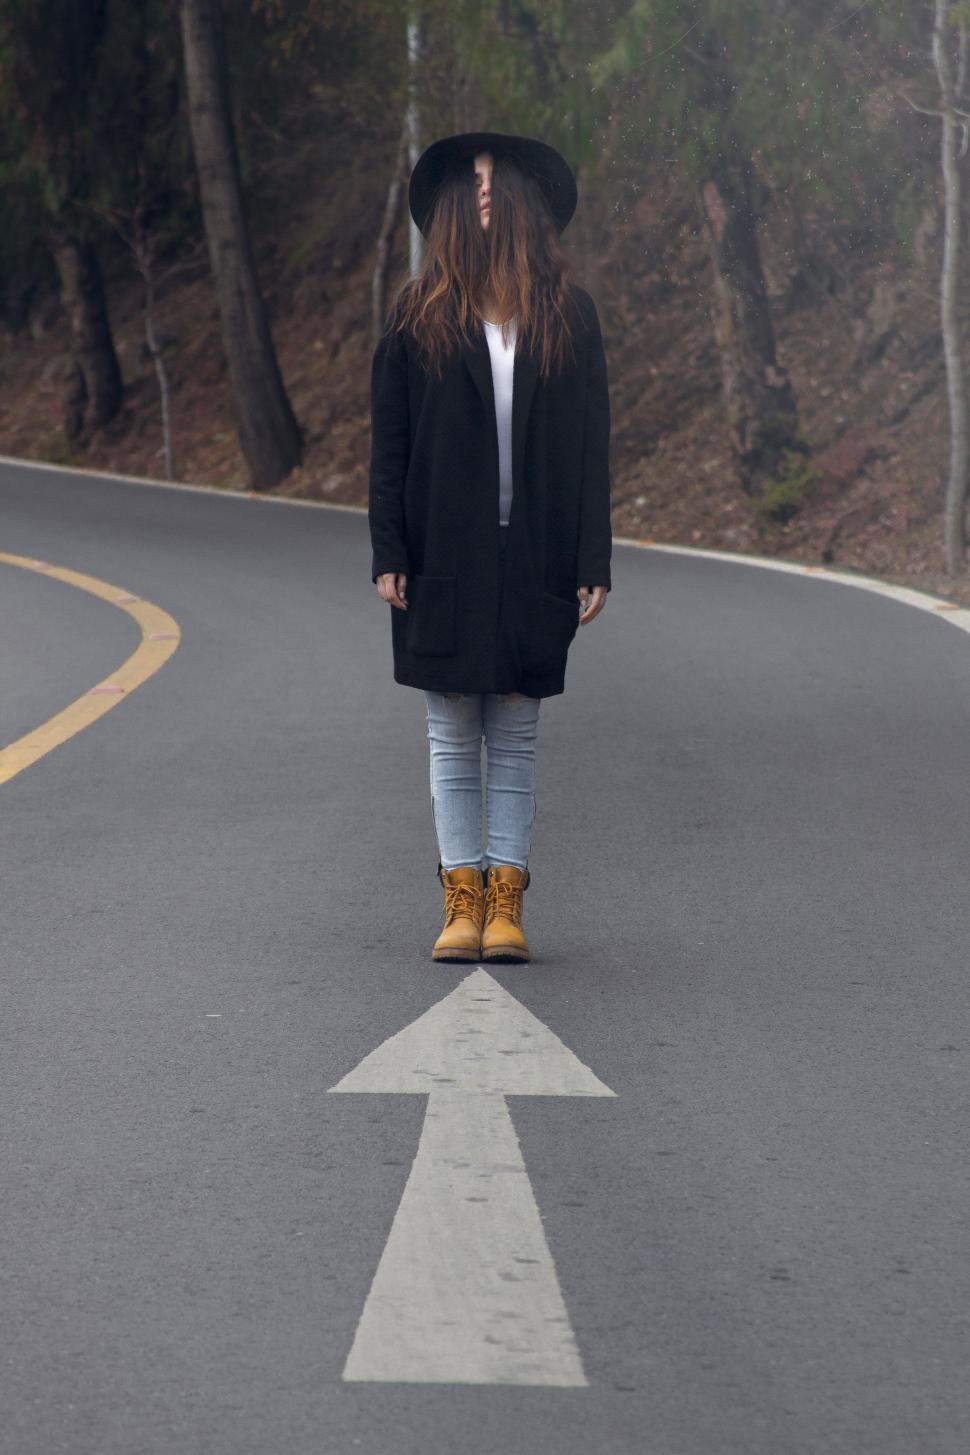 Free Image of Woman Standing on Road With Arrow 